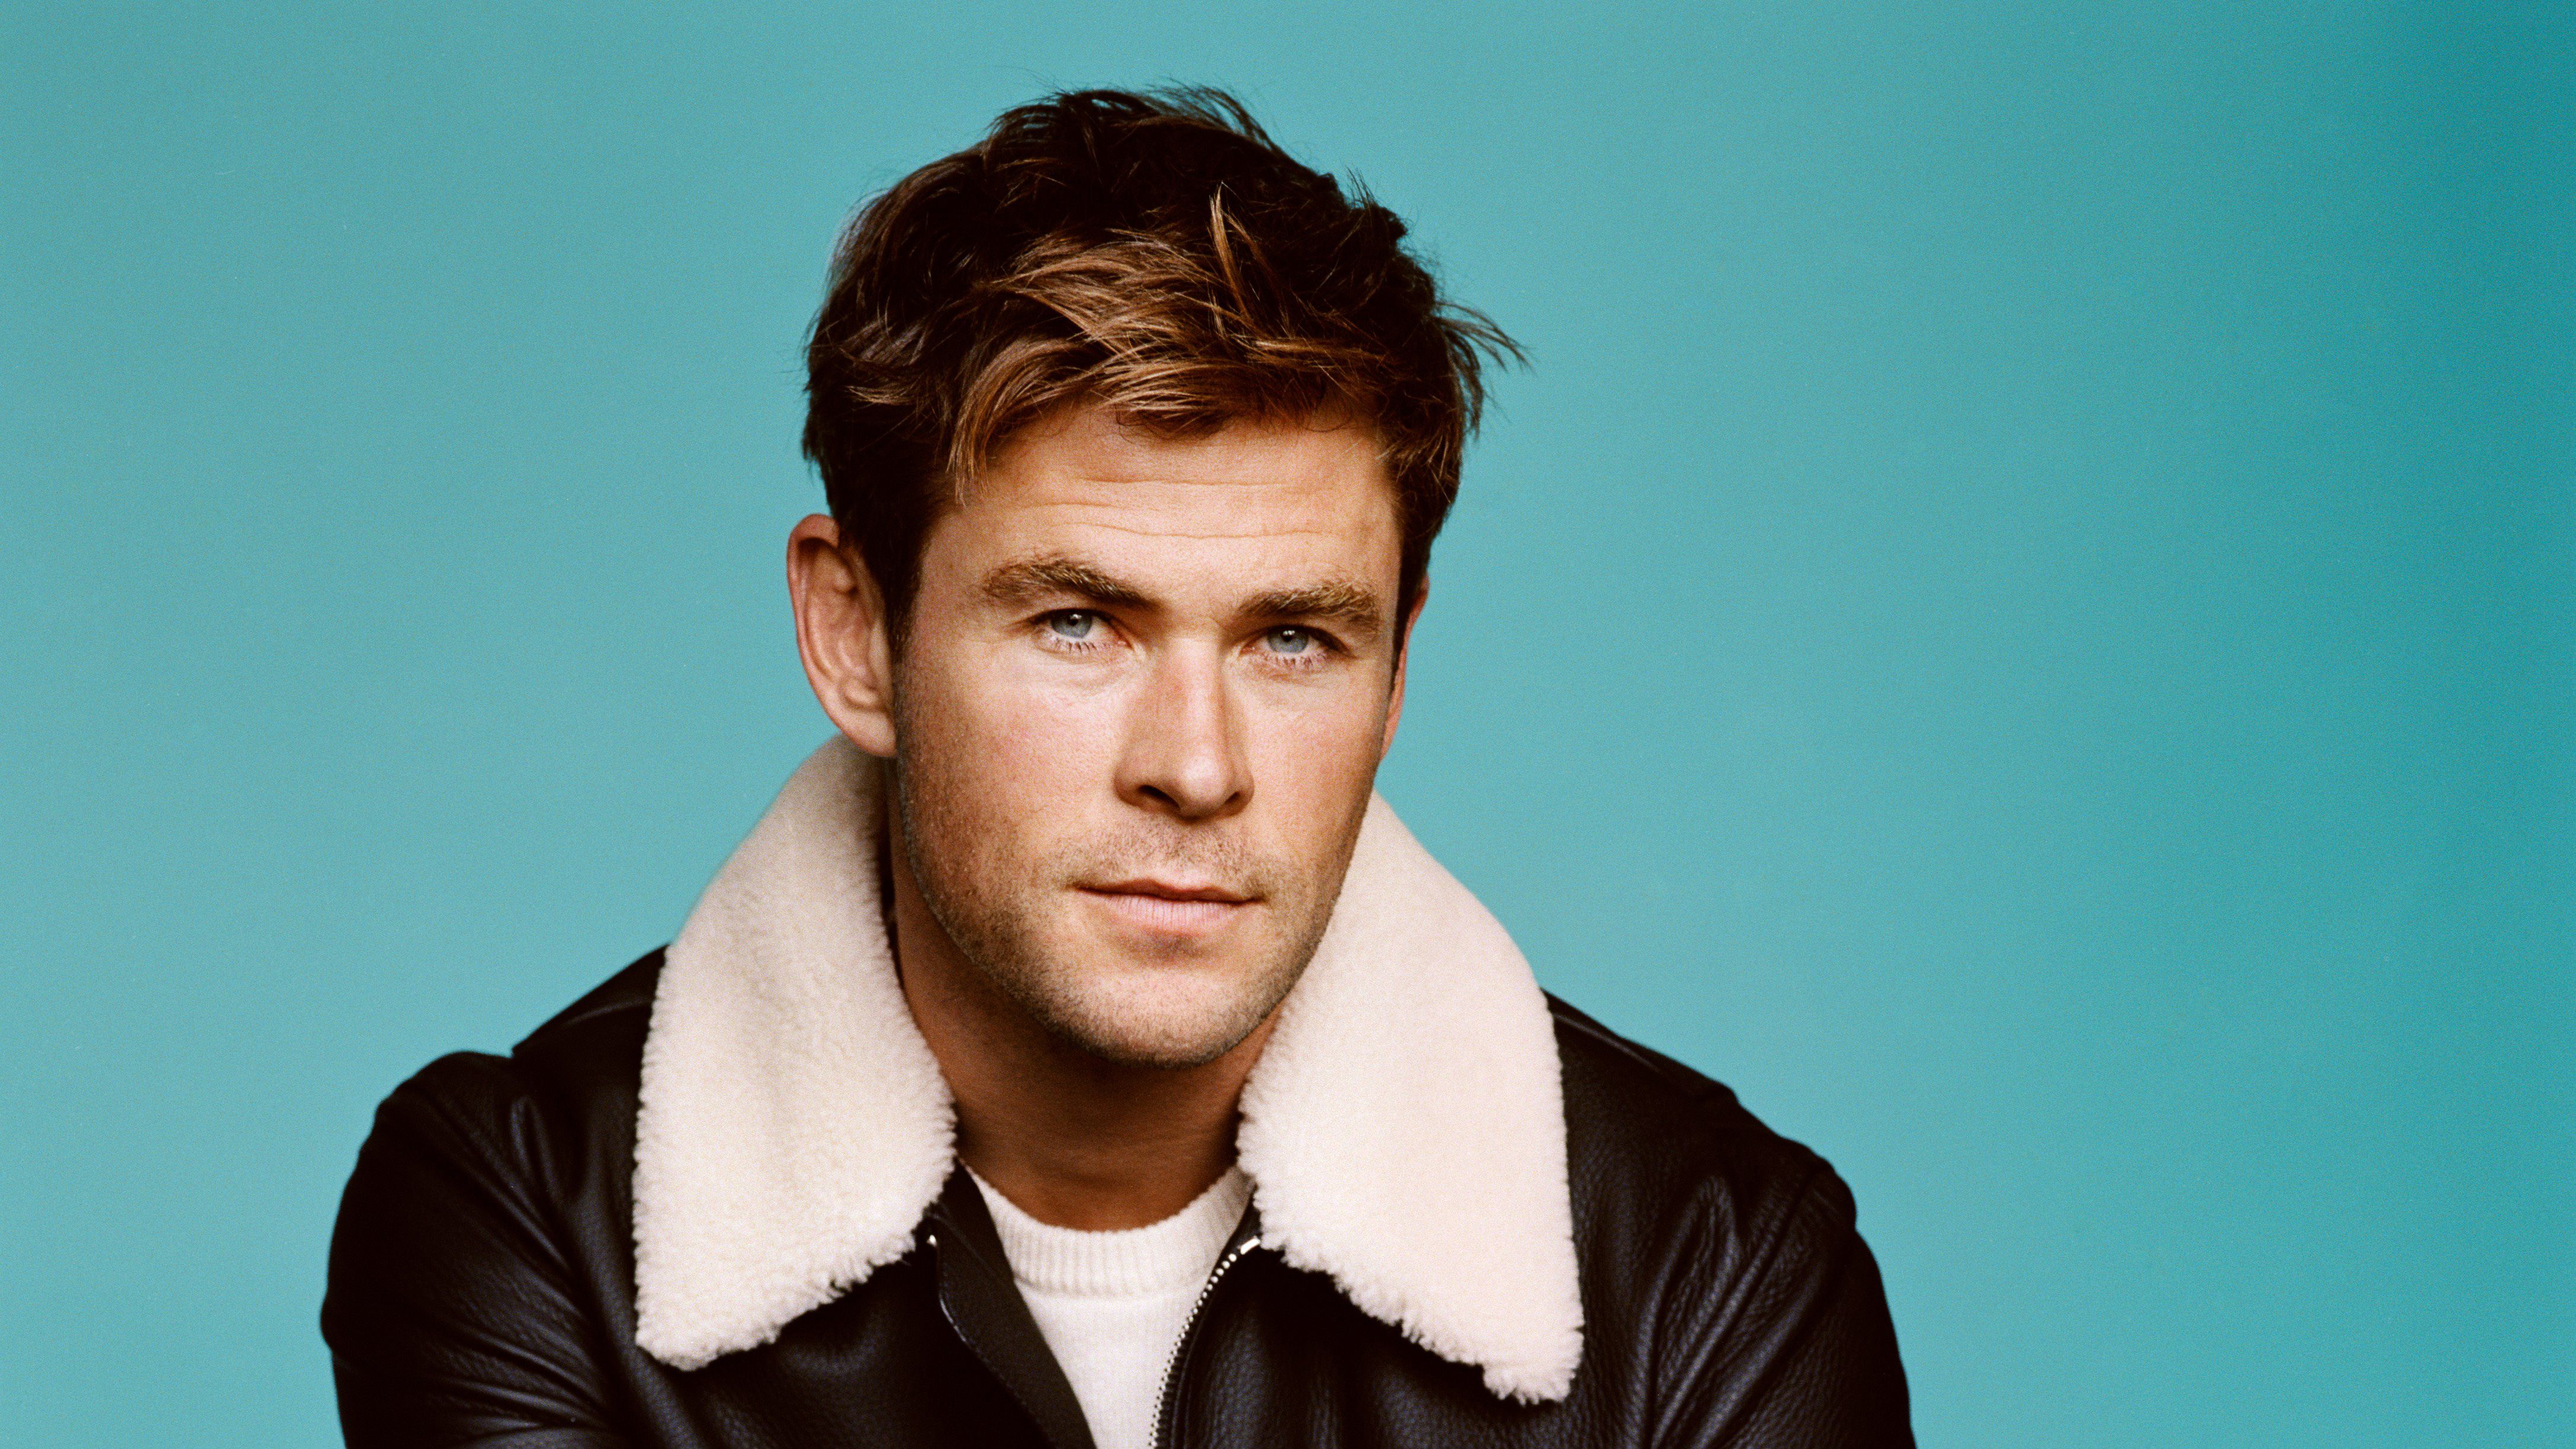 Chris Hemsworth GQ 2018 4k, HD Celebrities, 4k Wallpaper, Image, Background, Photo and Picture